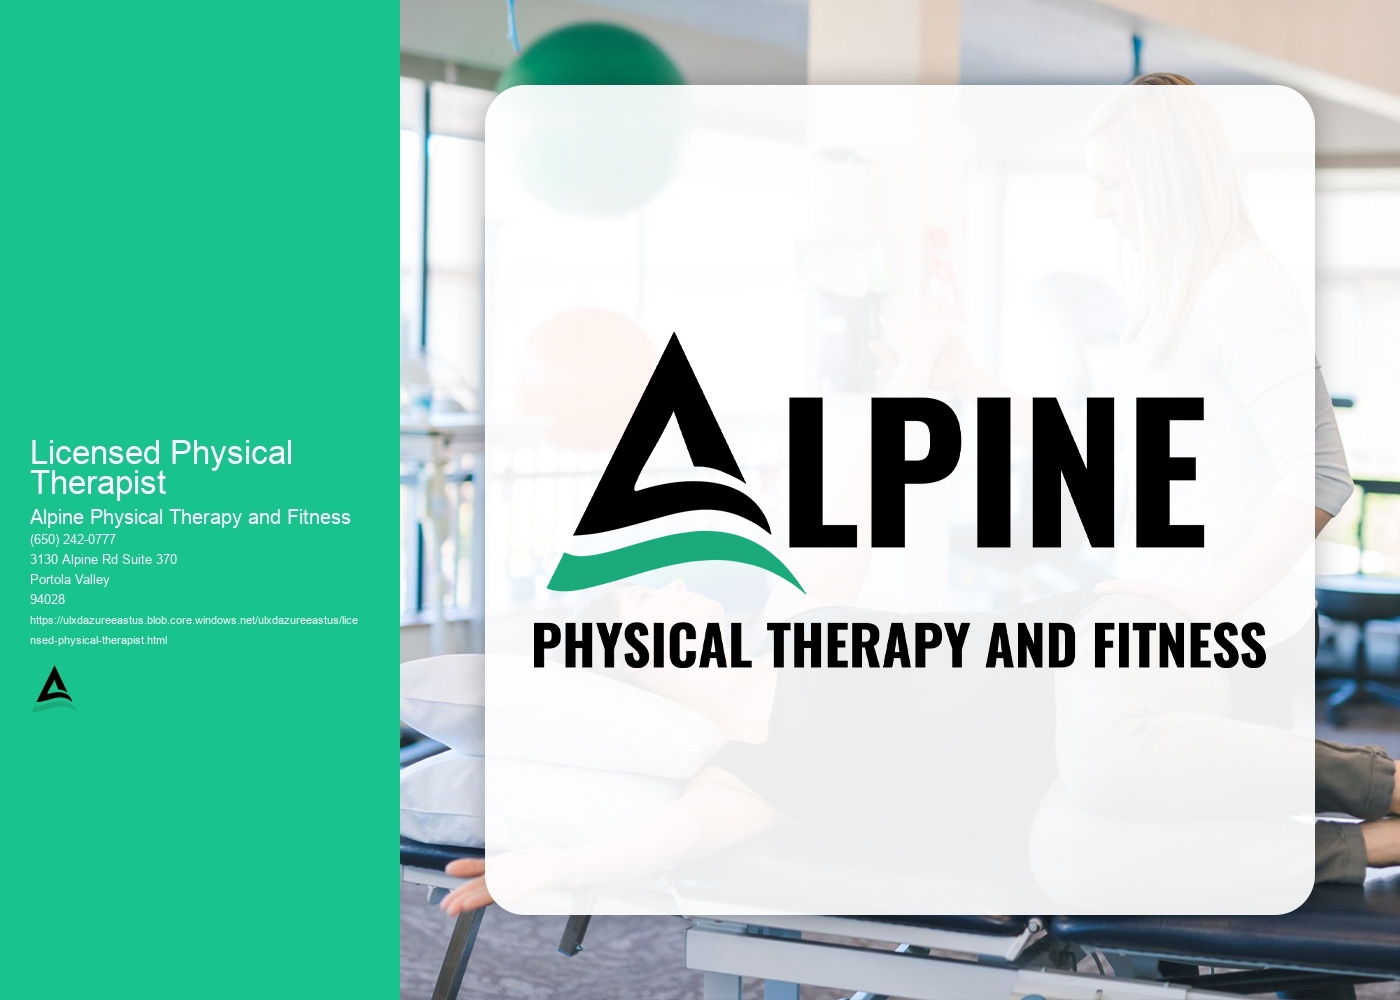 How does physical therapy incorporate specialized techniques, such as dry needling or kinesiology taping, in the treatment of musculoskeletal disorders?